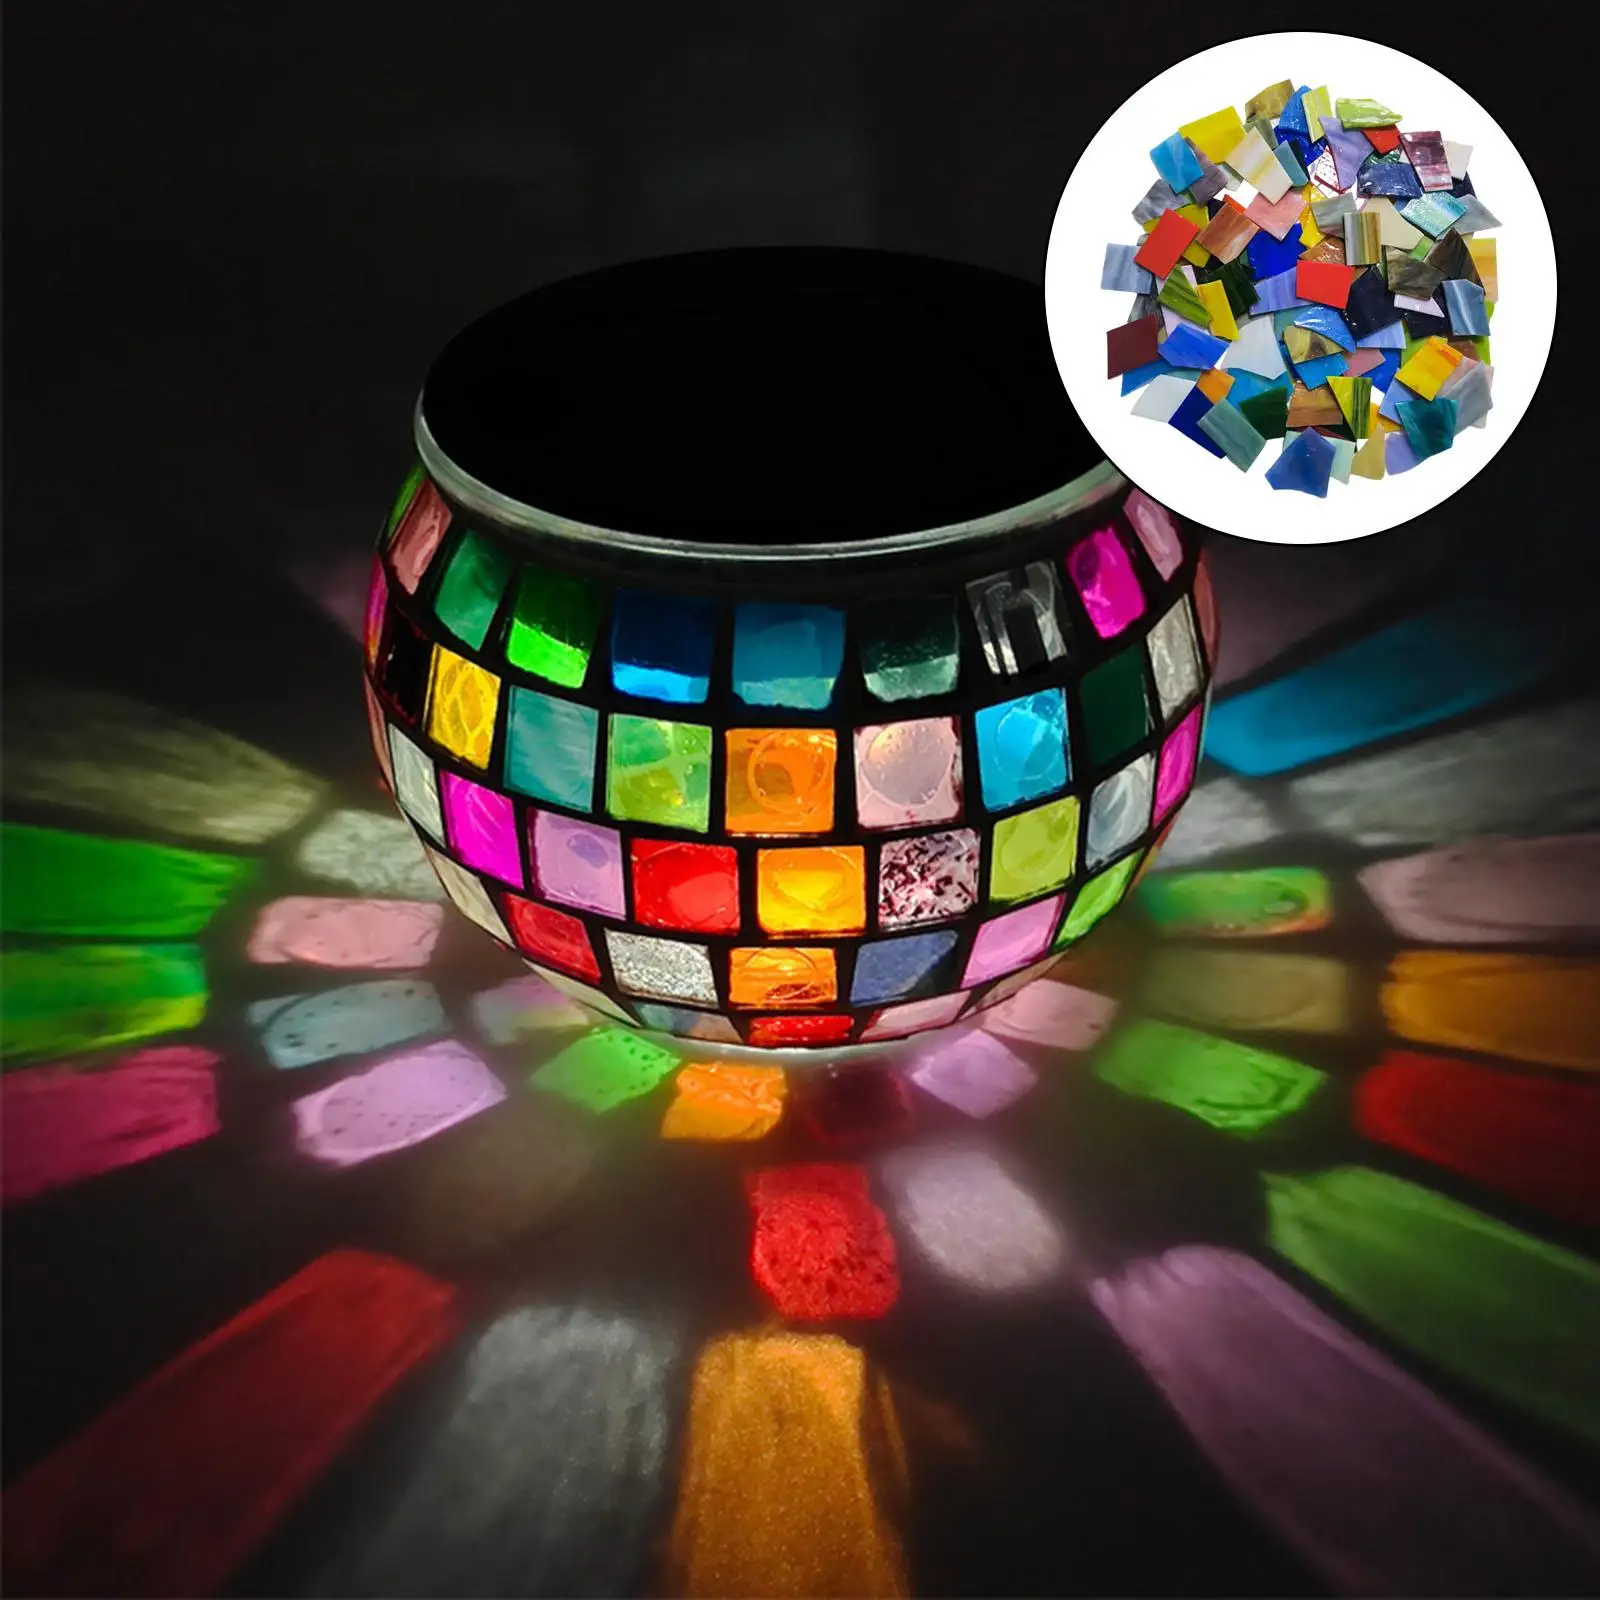 Colorful Mixed Shapes Mosaic Tiles for Crafts Garden Seat Table Cups Artwork Home Ornaments Mosaic Projects